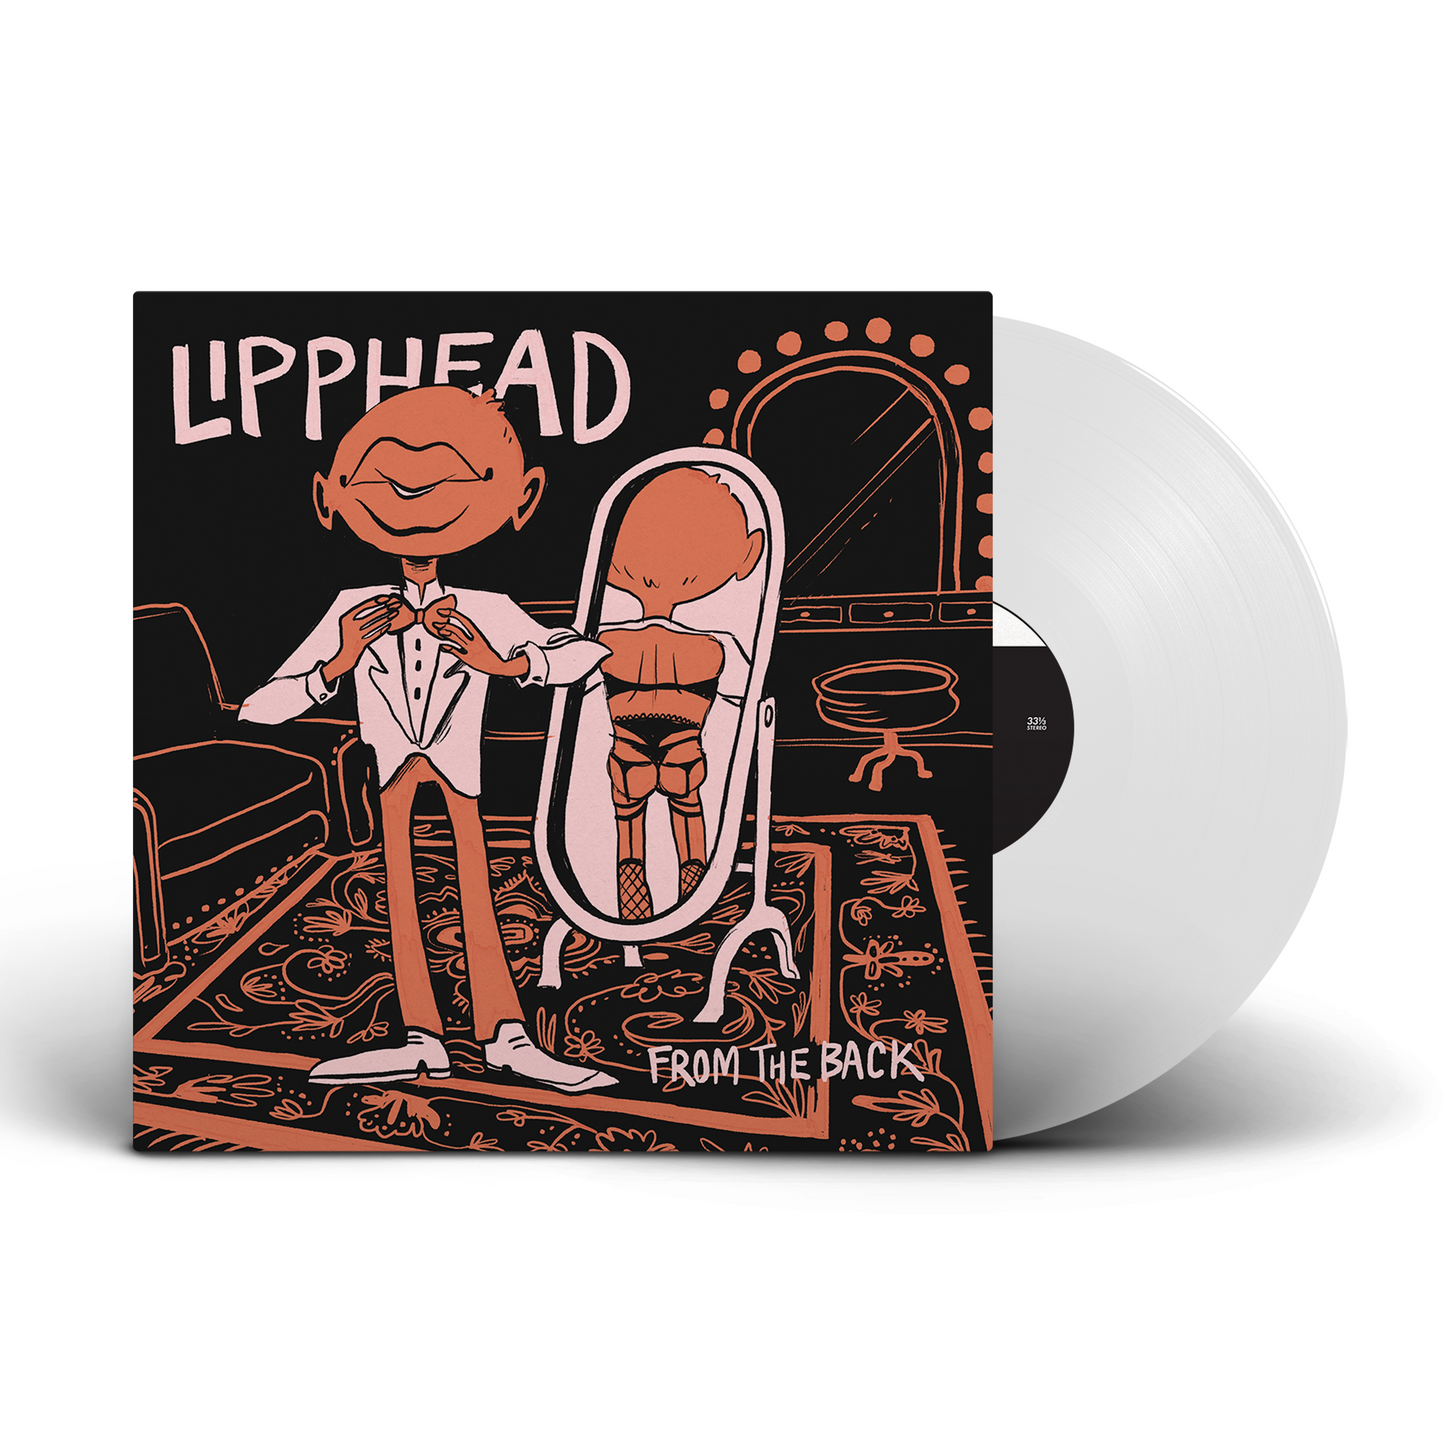 Lipphead - From The Back (LP) (Translucent)